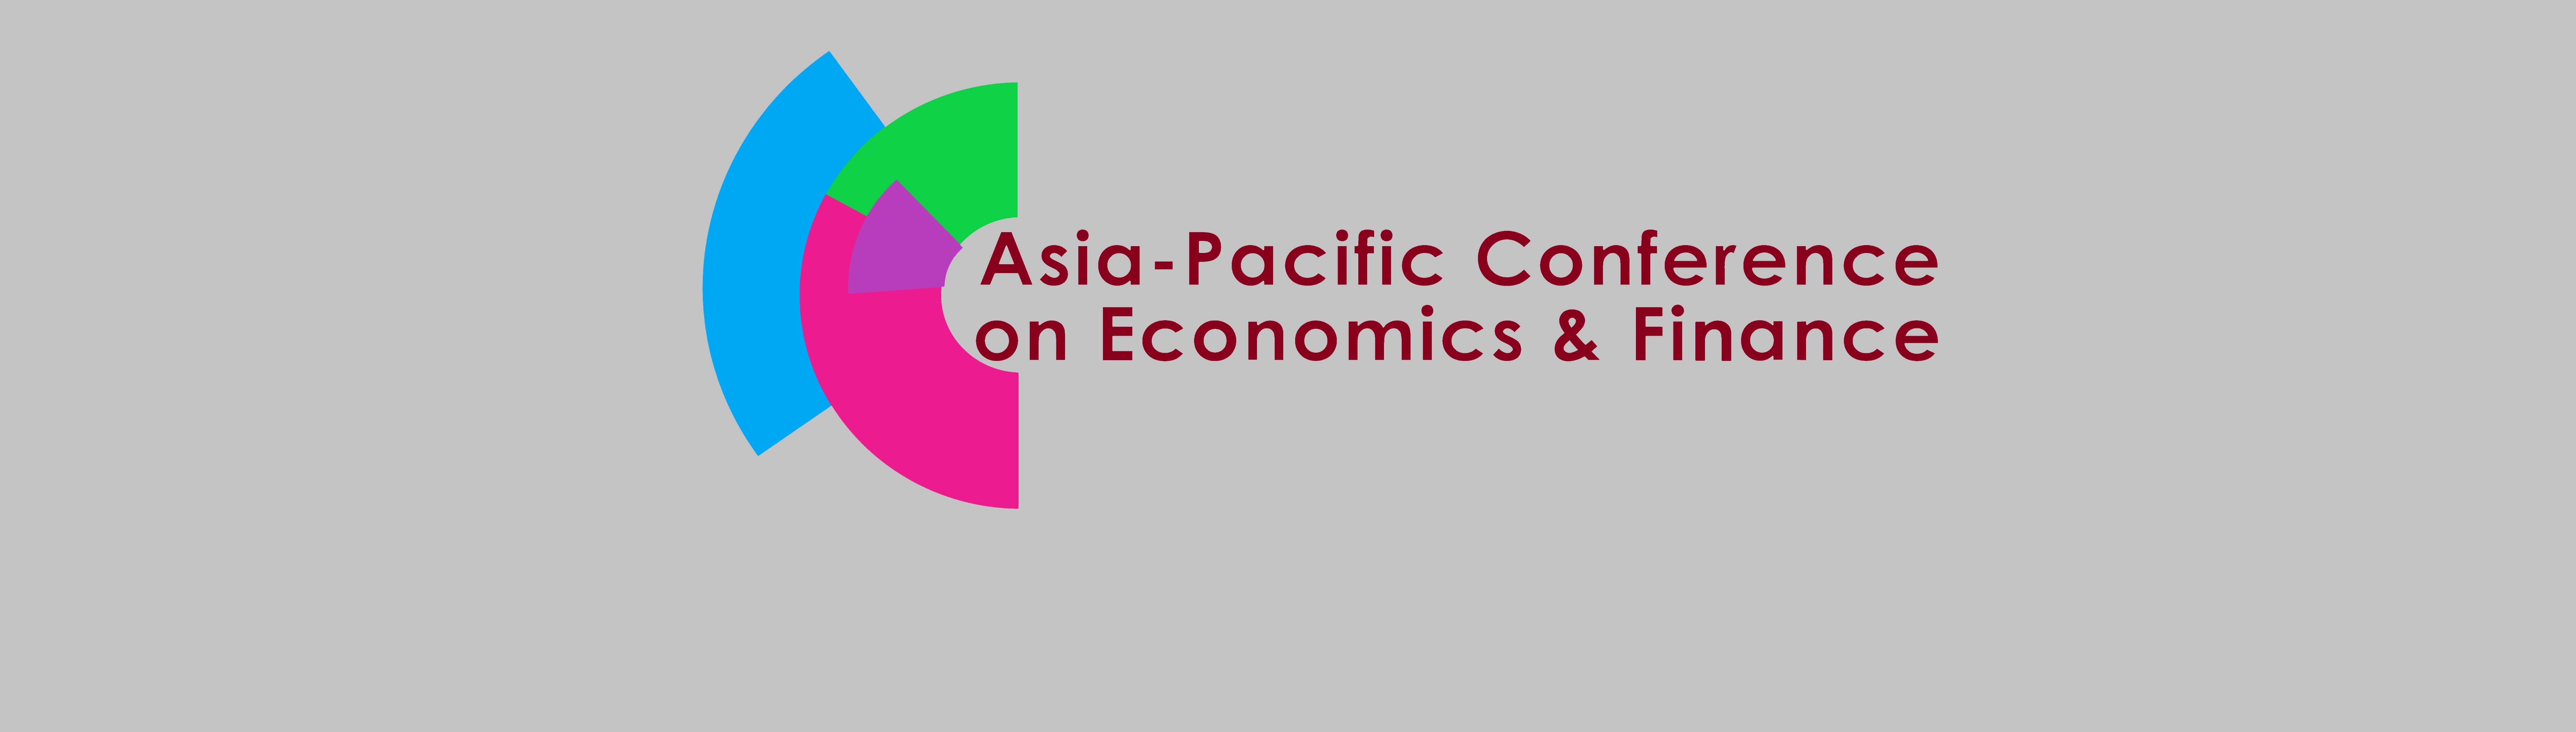 2019 Asia-Pacific Conference on Economics & Finance 